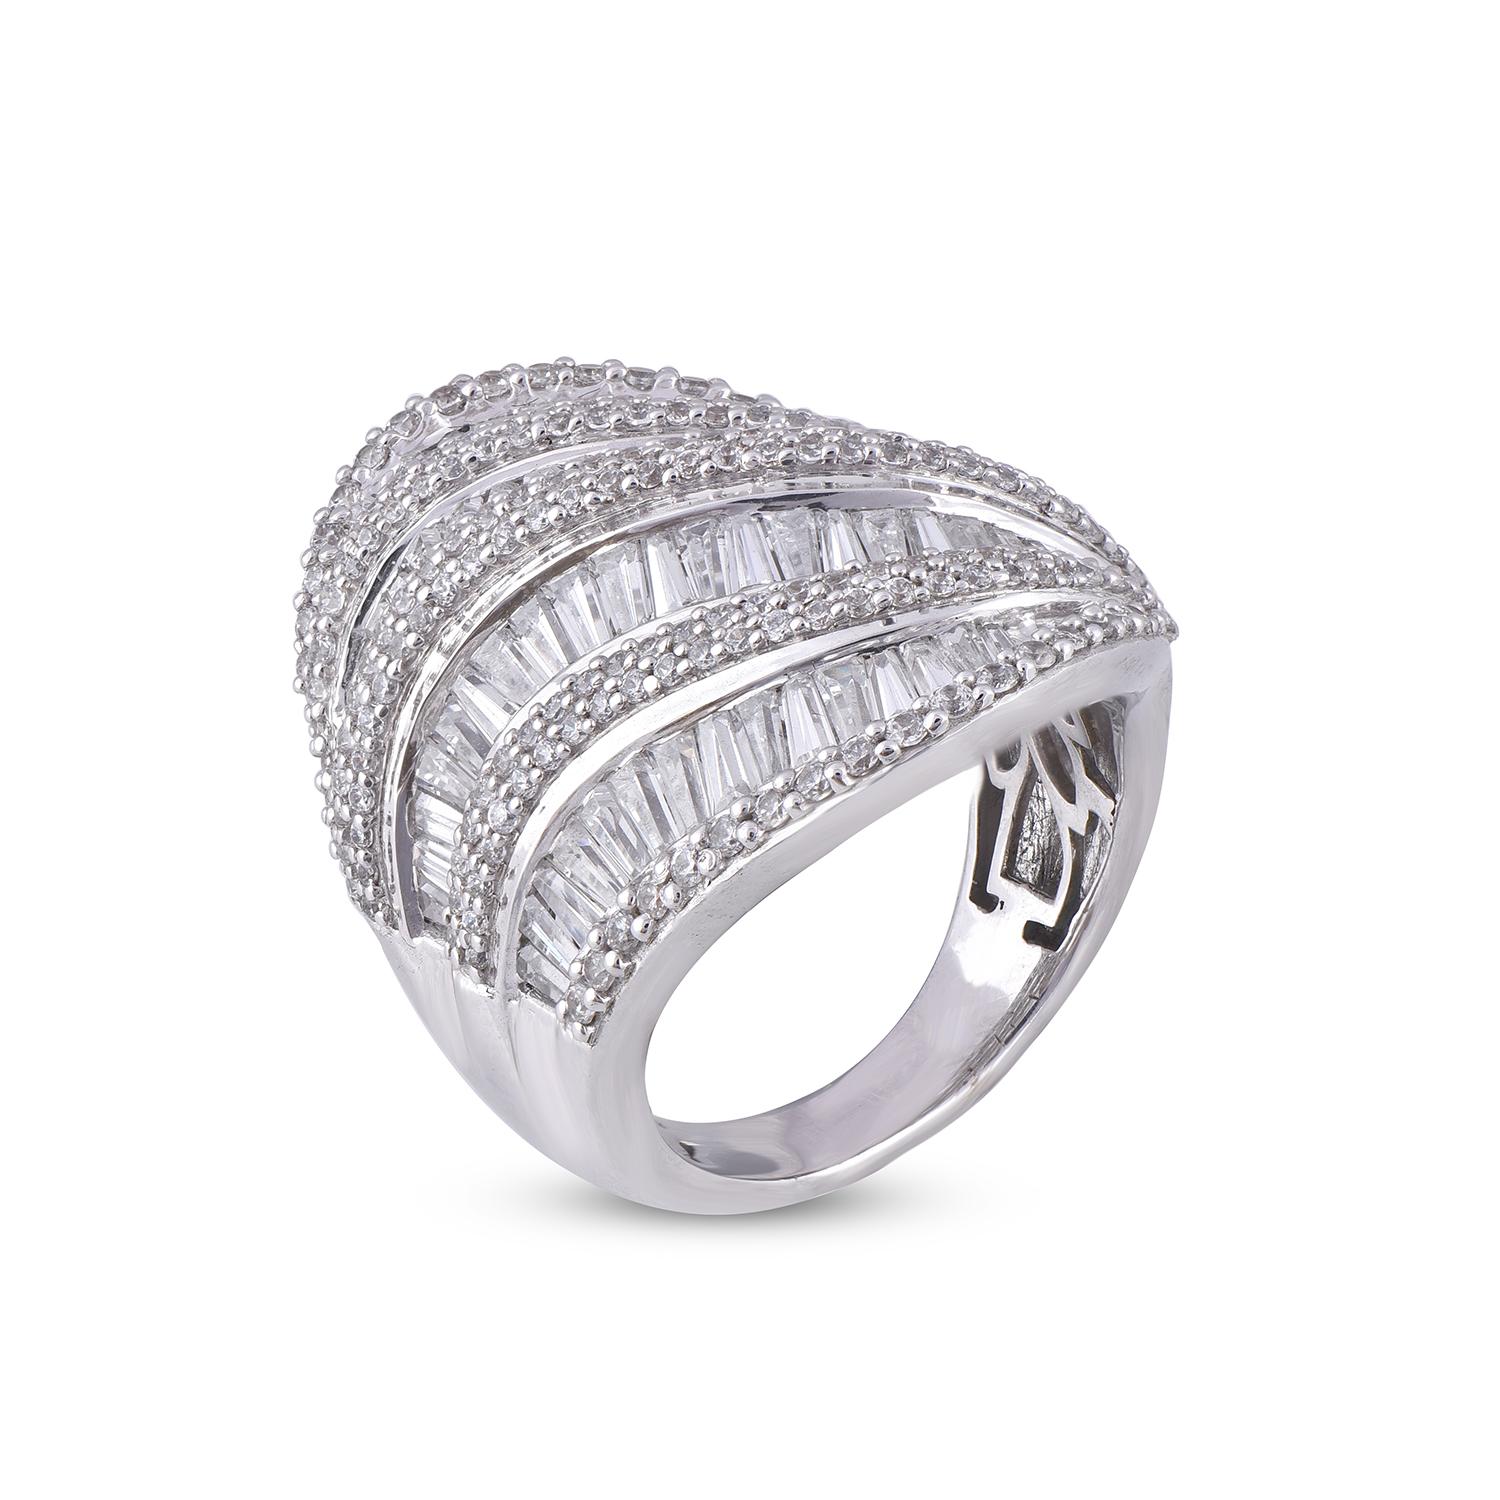 This wave engagement Ring is expertly crafted in 14 Karat white gold and features 3.00 ct of 202 round and 82 baguette cut diamond set in pave, prong & channel settings. The diamonds are natural, not-treated and conflict-free with H-I color and I2